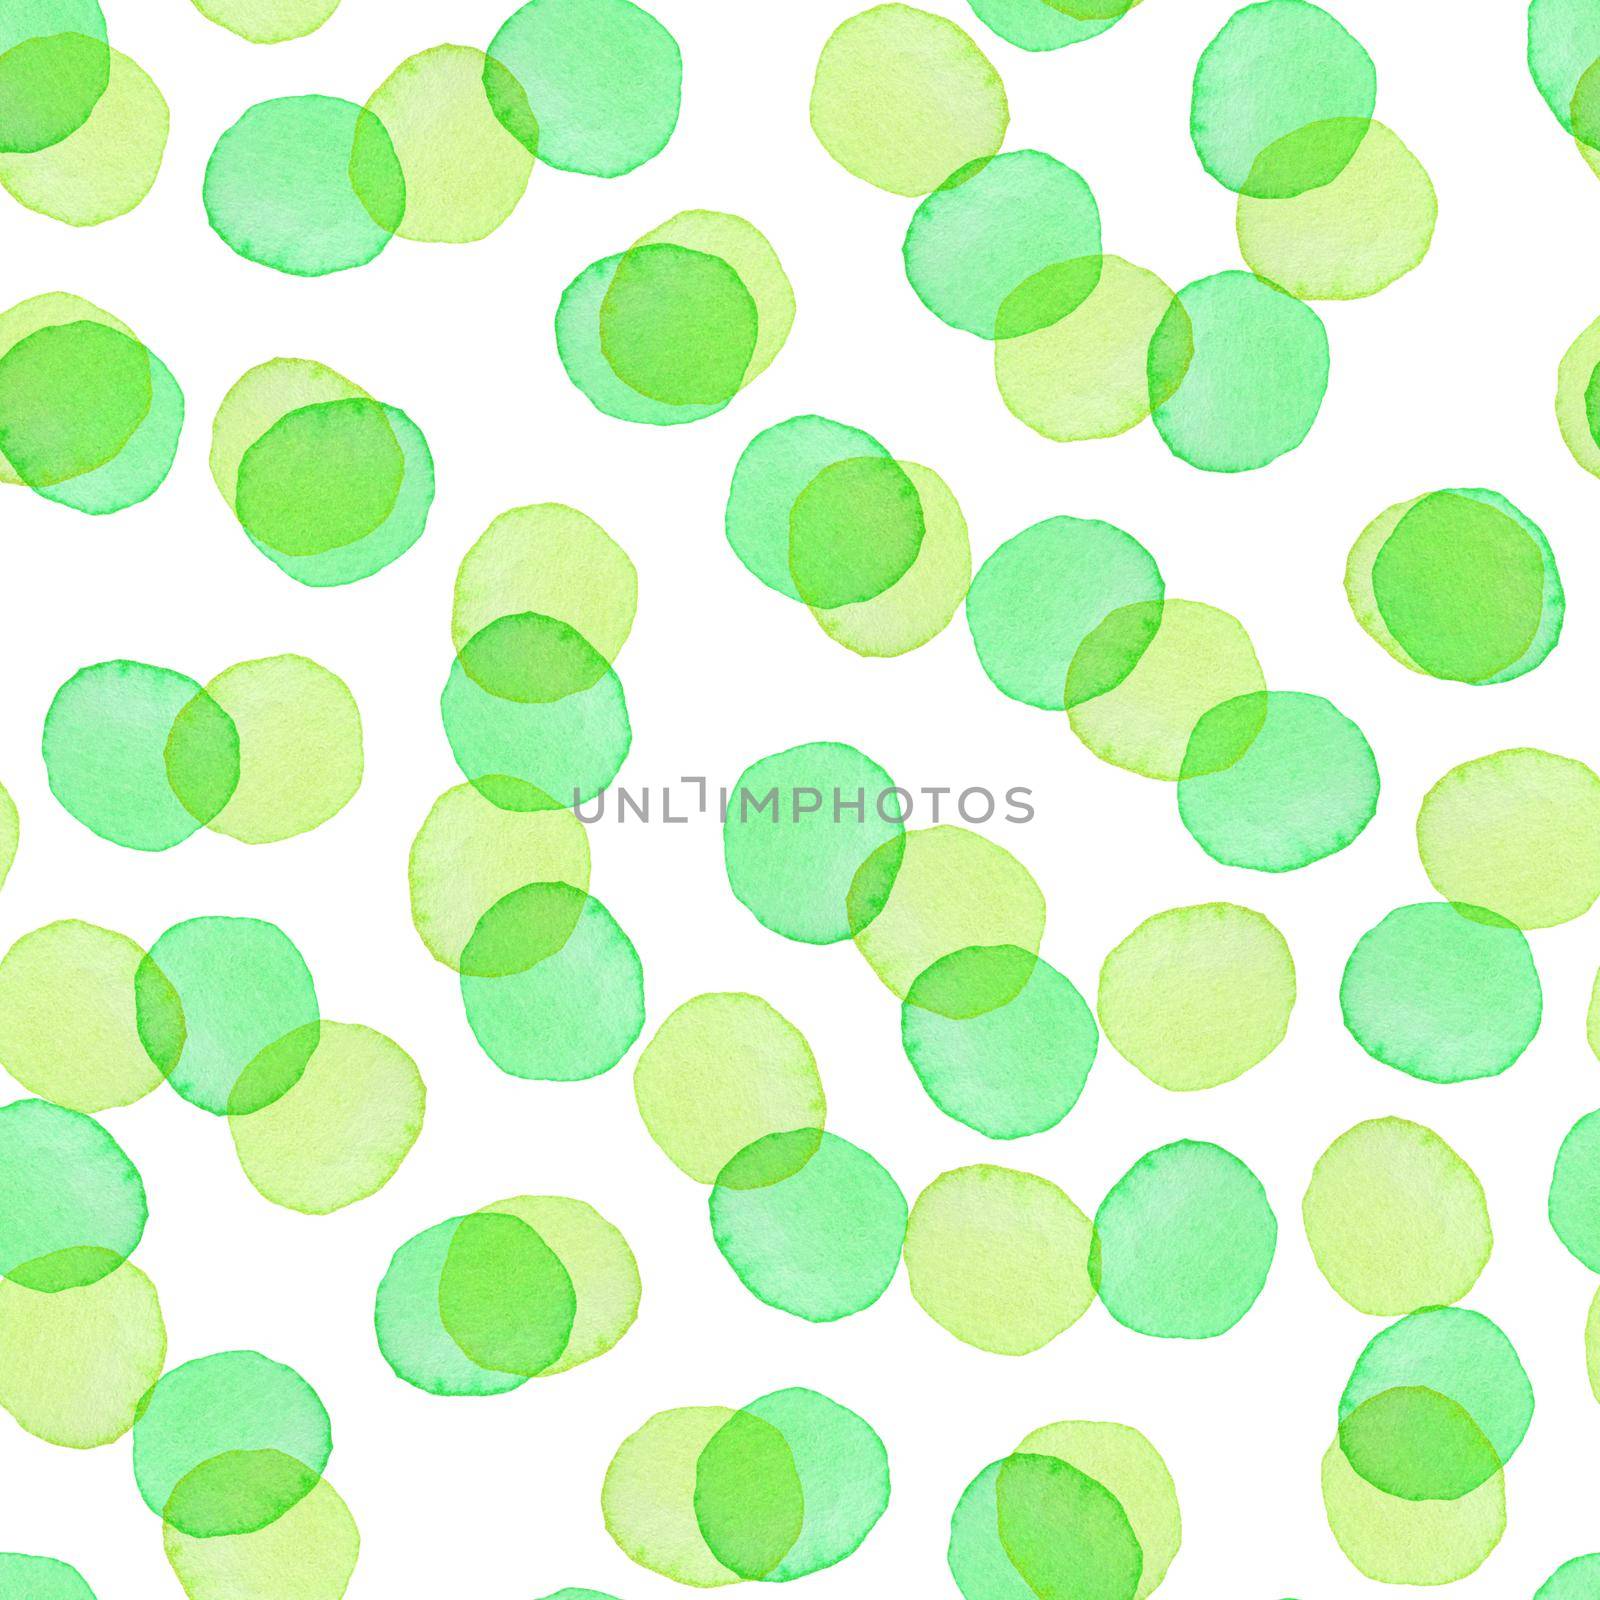 Hand Painted Brush Polka Dot Seamless Watercolor Pattern. Abstract watercolour Round Circles in Green Color. Artistic Design for Fabric and Background.